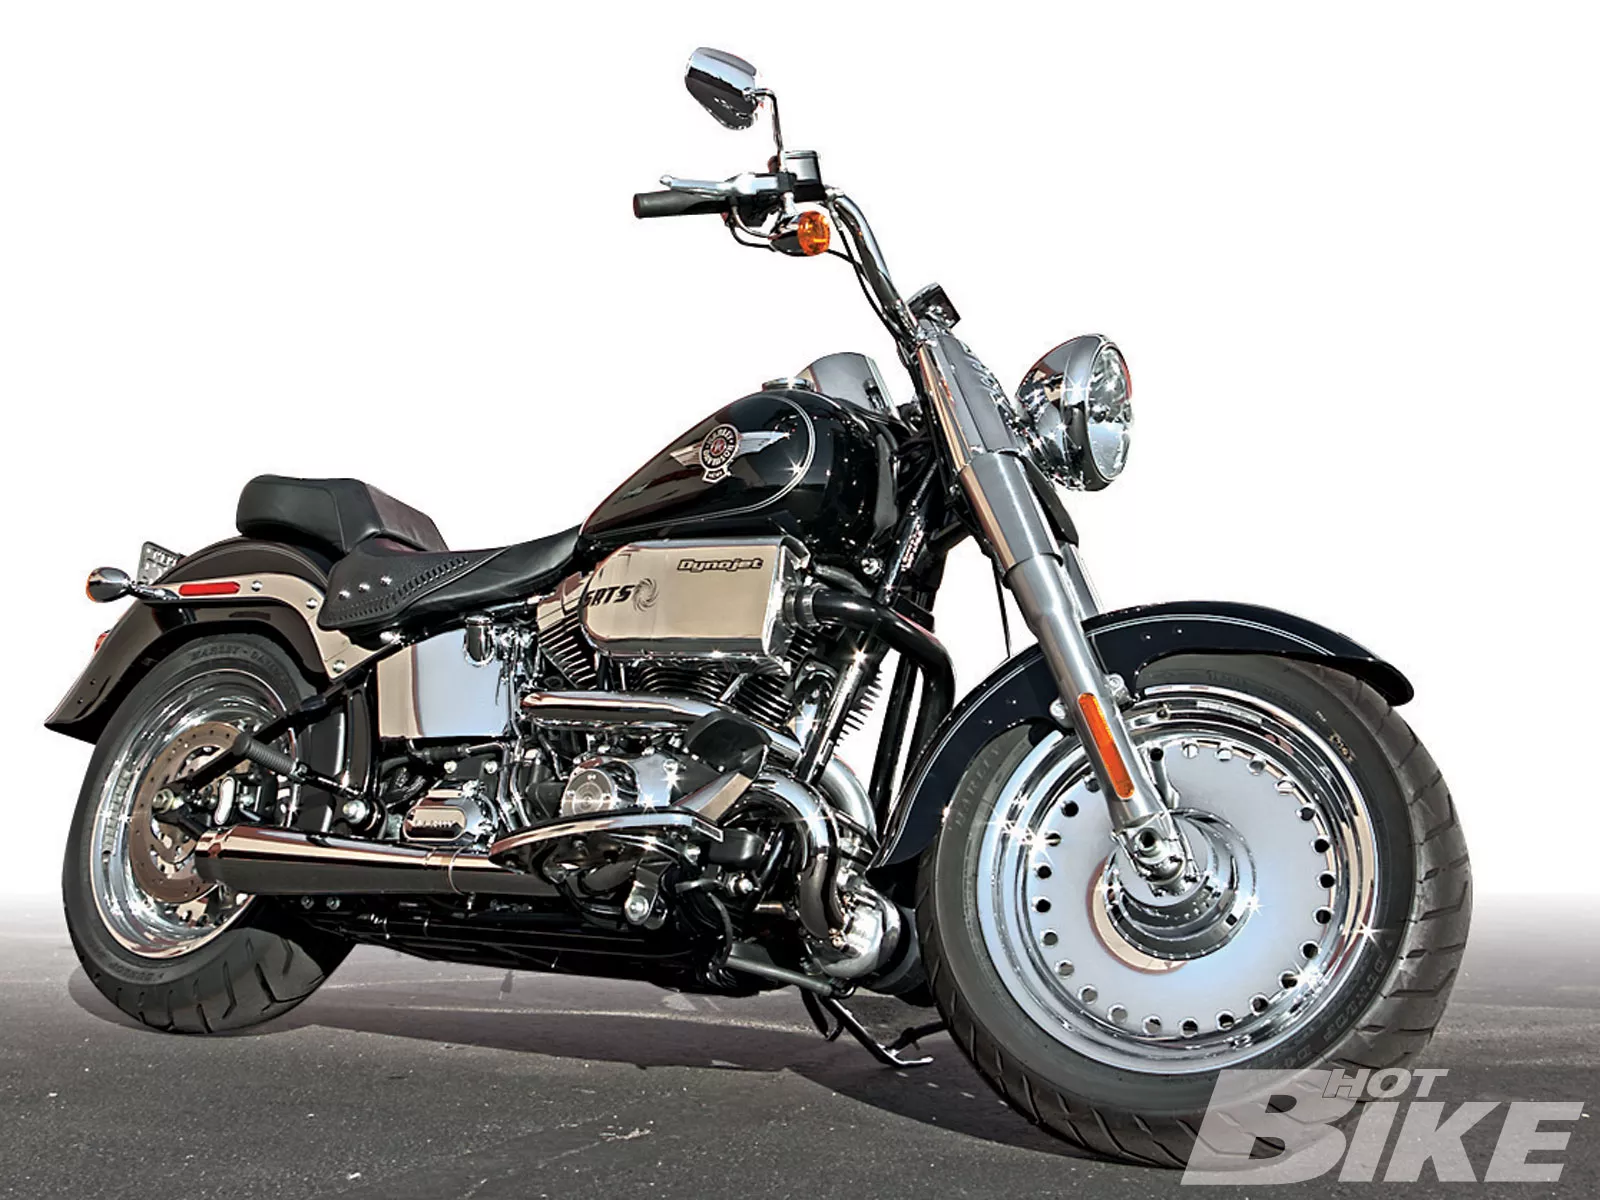 Getting Boosted | Pump Up Your V-twin’s Power With a Sean Ray Turbo System - Hot Bike Magazine